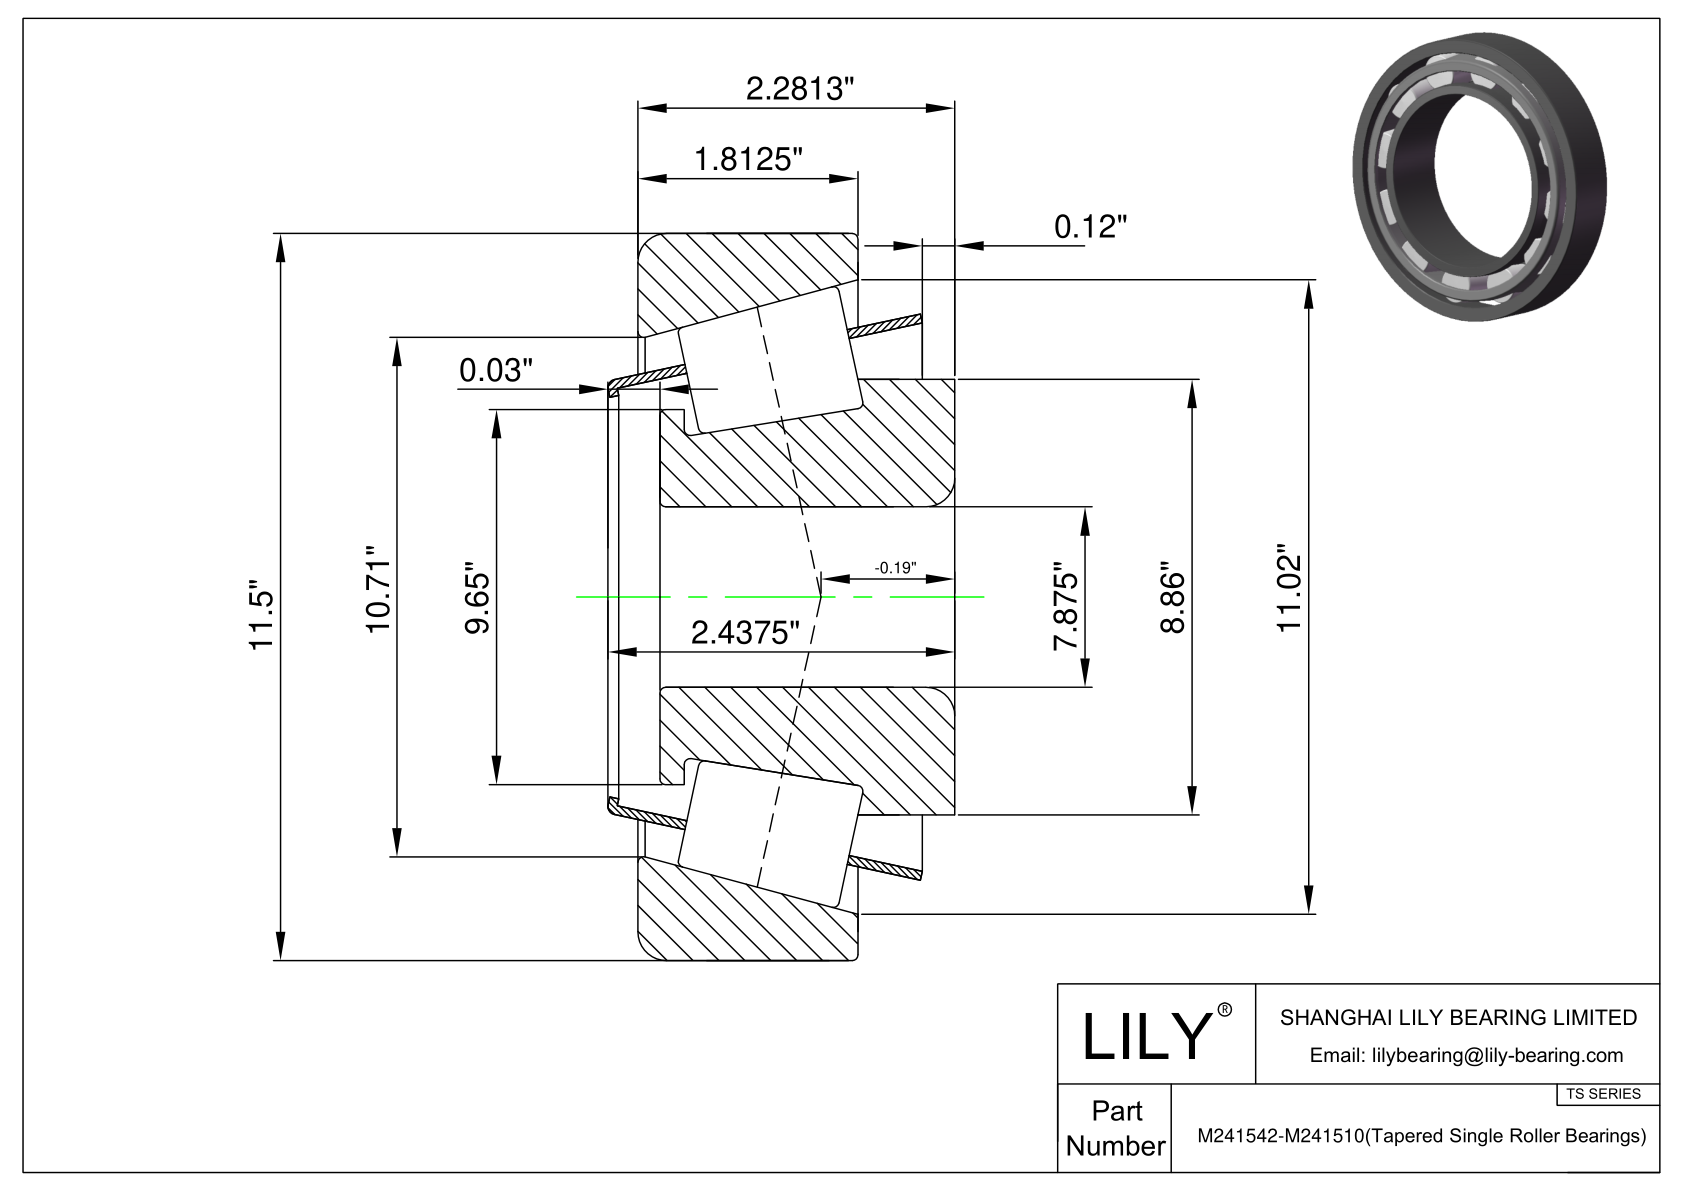 M241542-M241510 TS (Tapered Single Roller Bearings) (Imperial) cad drawing